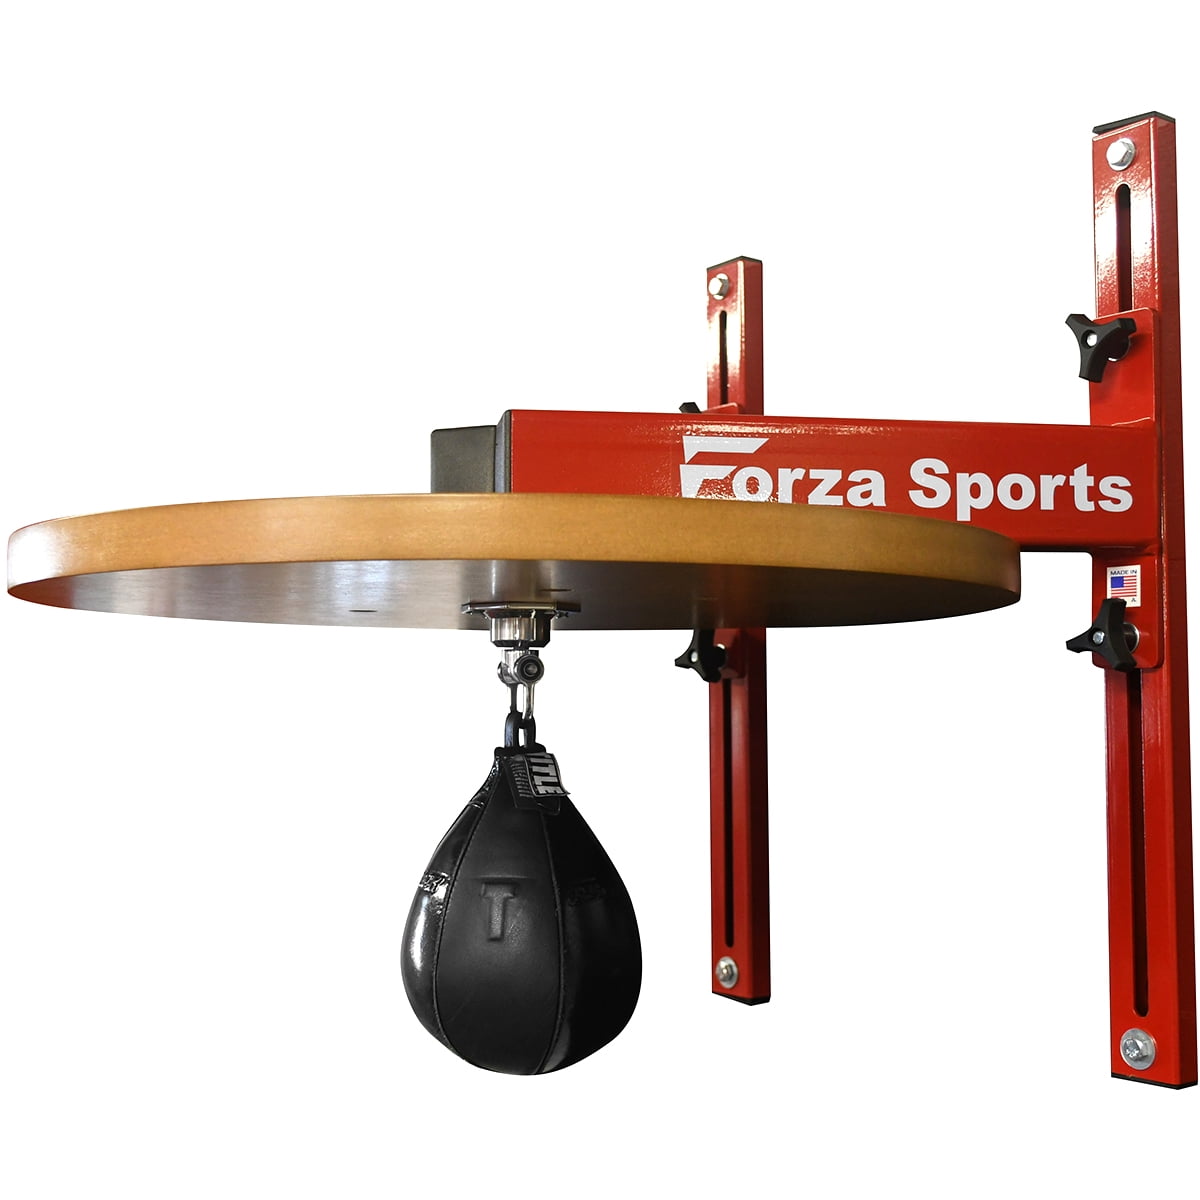 Forza Sports Speed Bag Platform with Hypersonic Swivel - 0 - 0